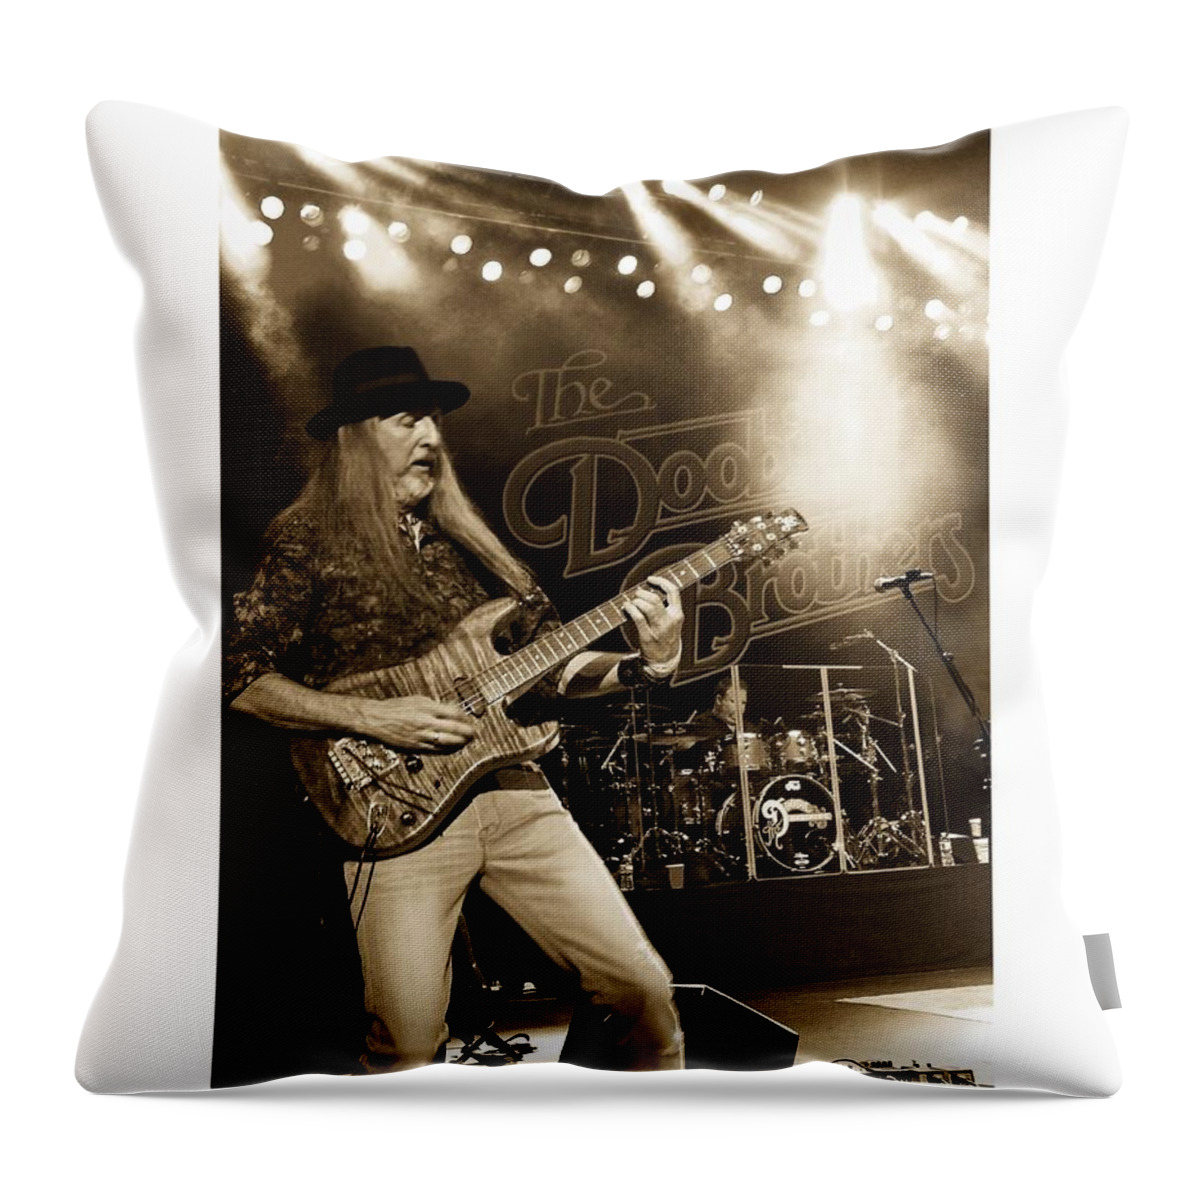 Doobie Brothers Throw Pillow featuring the photograph The Doobie Brothers by Alice Gipson